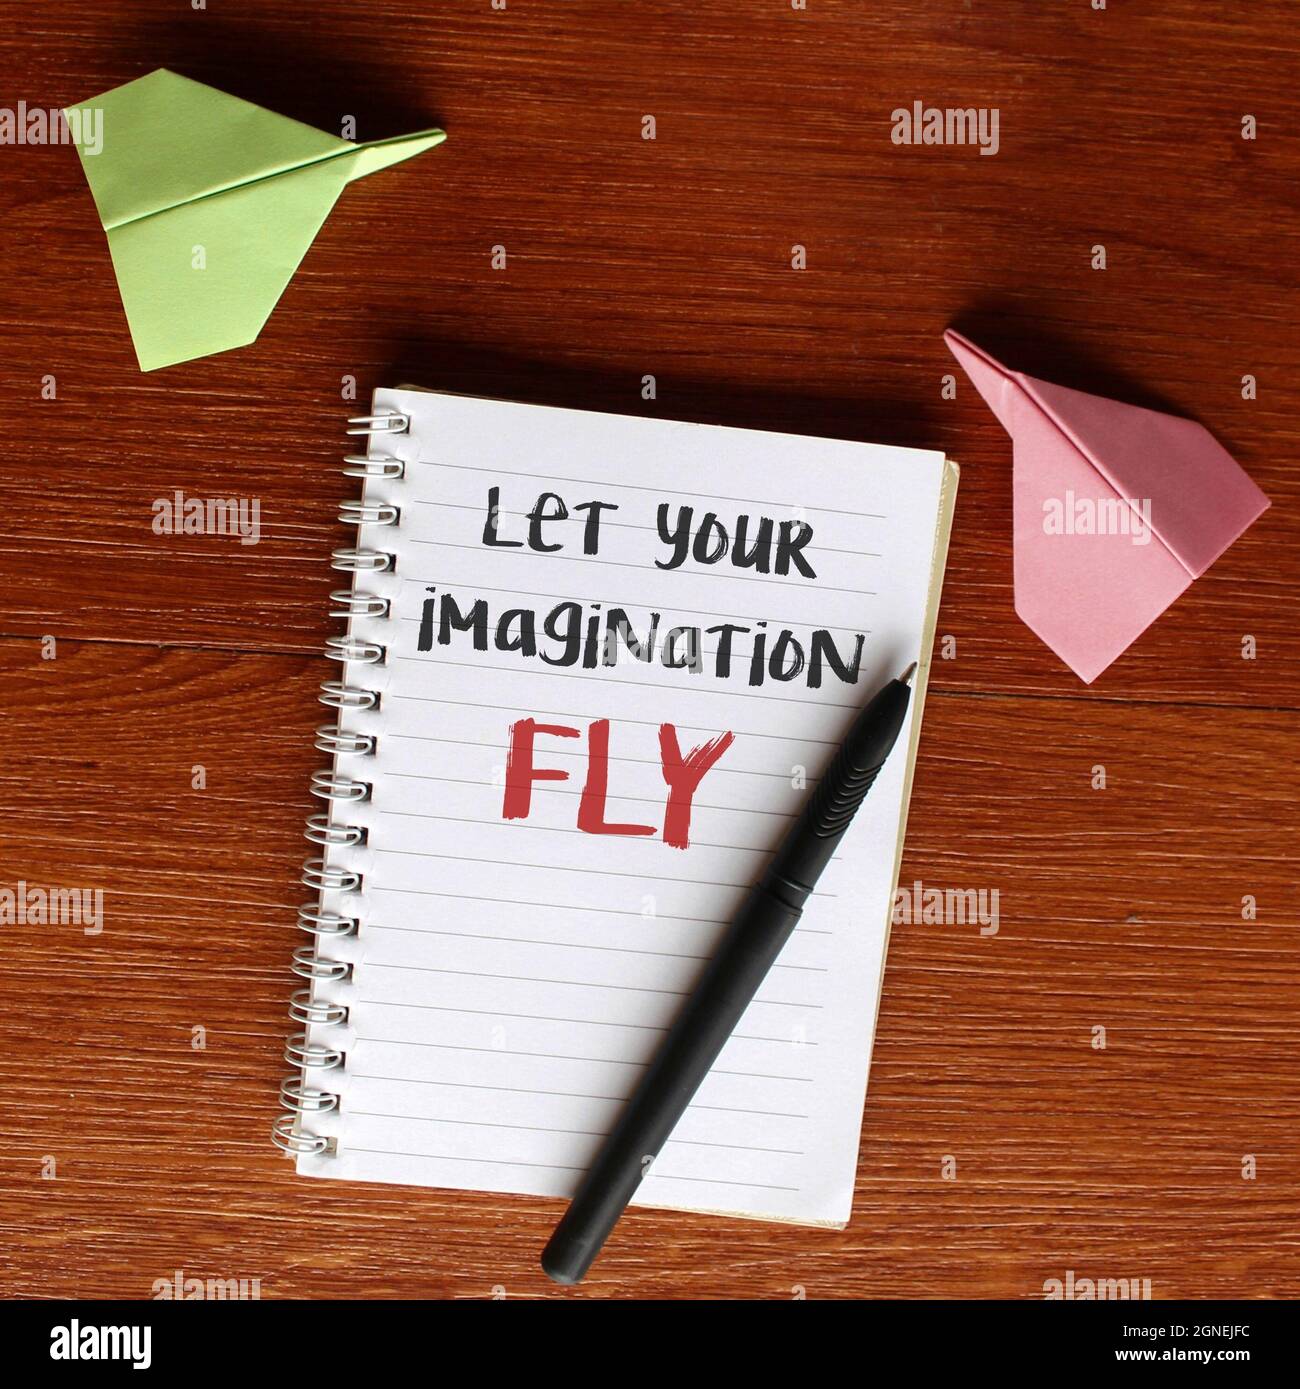 Motivational and inspirational quotes. Top view image of paper plane and notebook with text LET YOUR IMAGINATION FLY Stock Photo